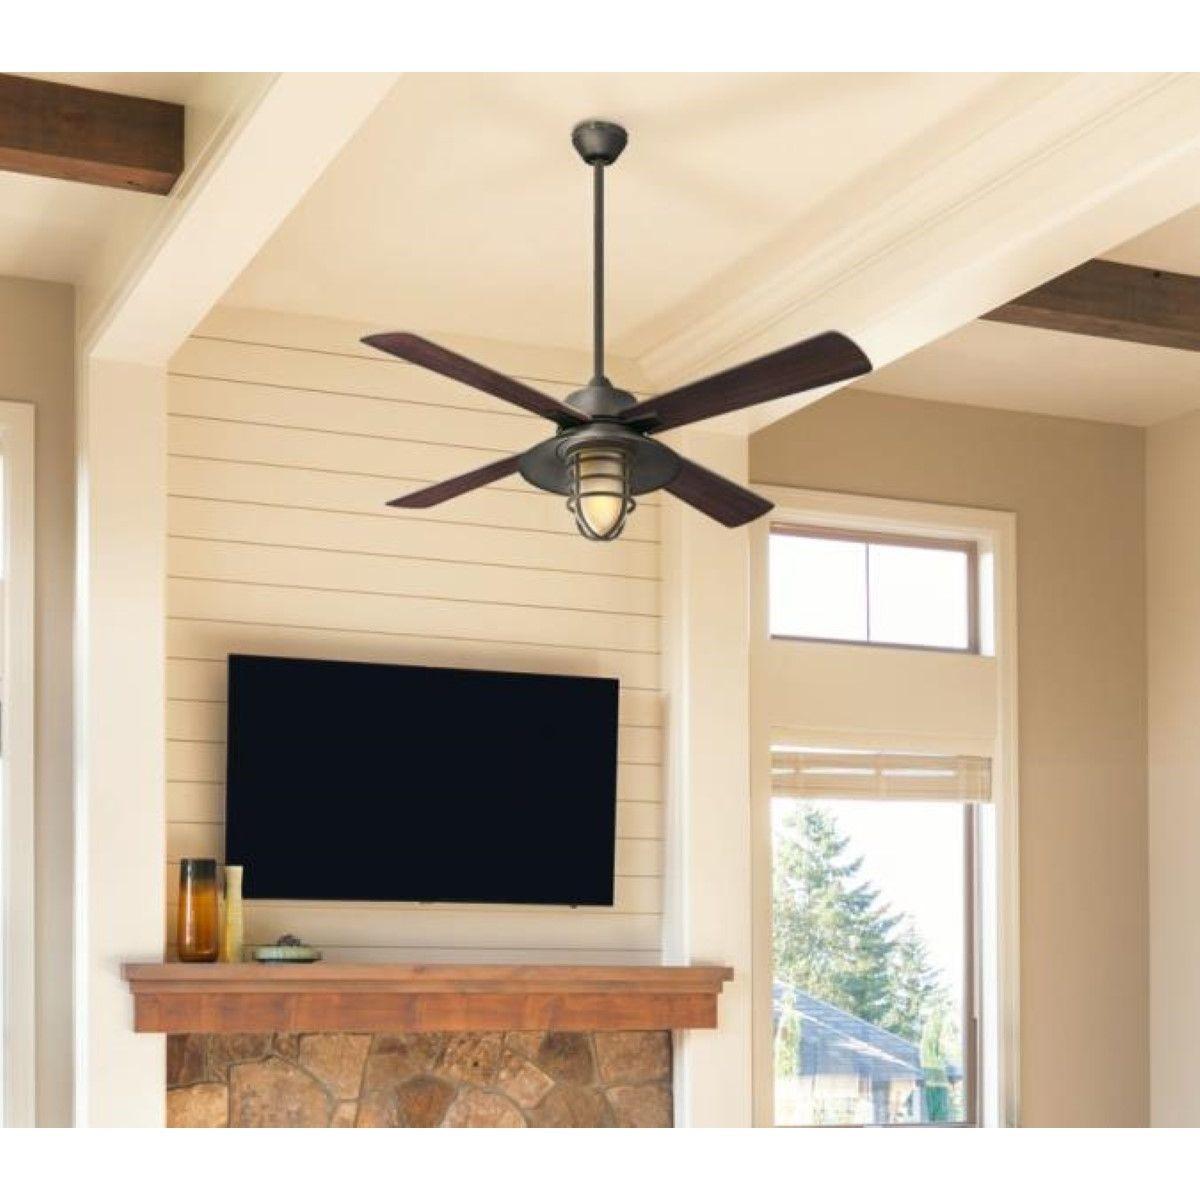 Porto 52 Inch Rustic Caged Smart Ceiling Fan With Light And Remote, Black/Bronze Finish